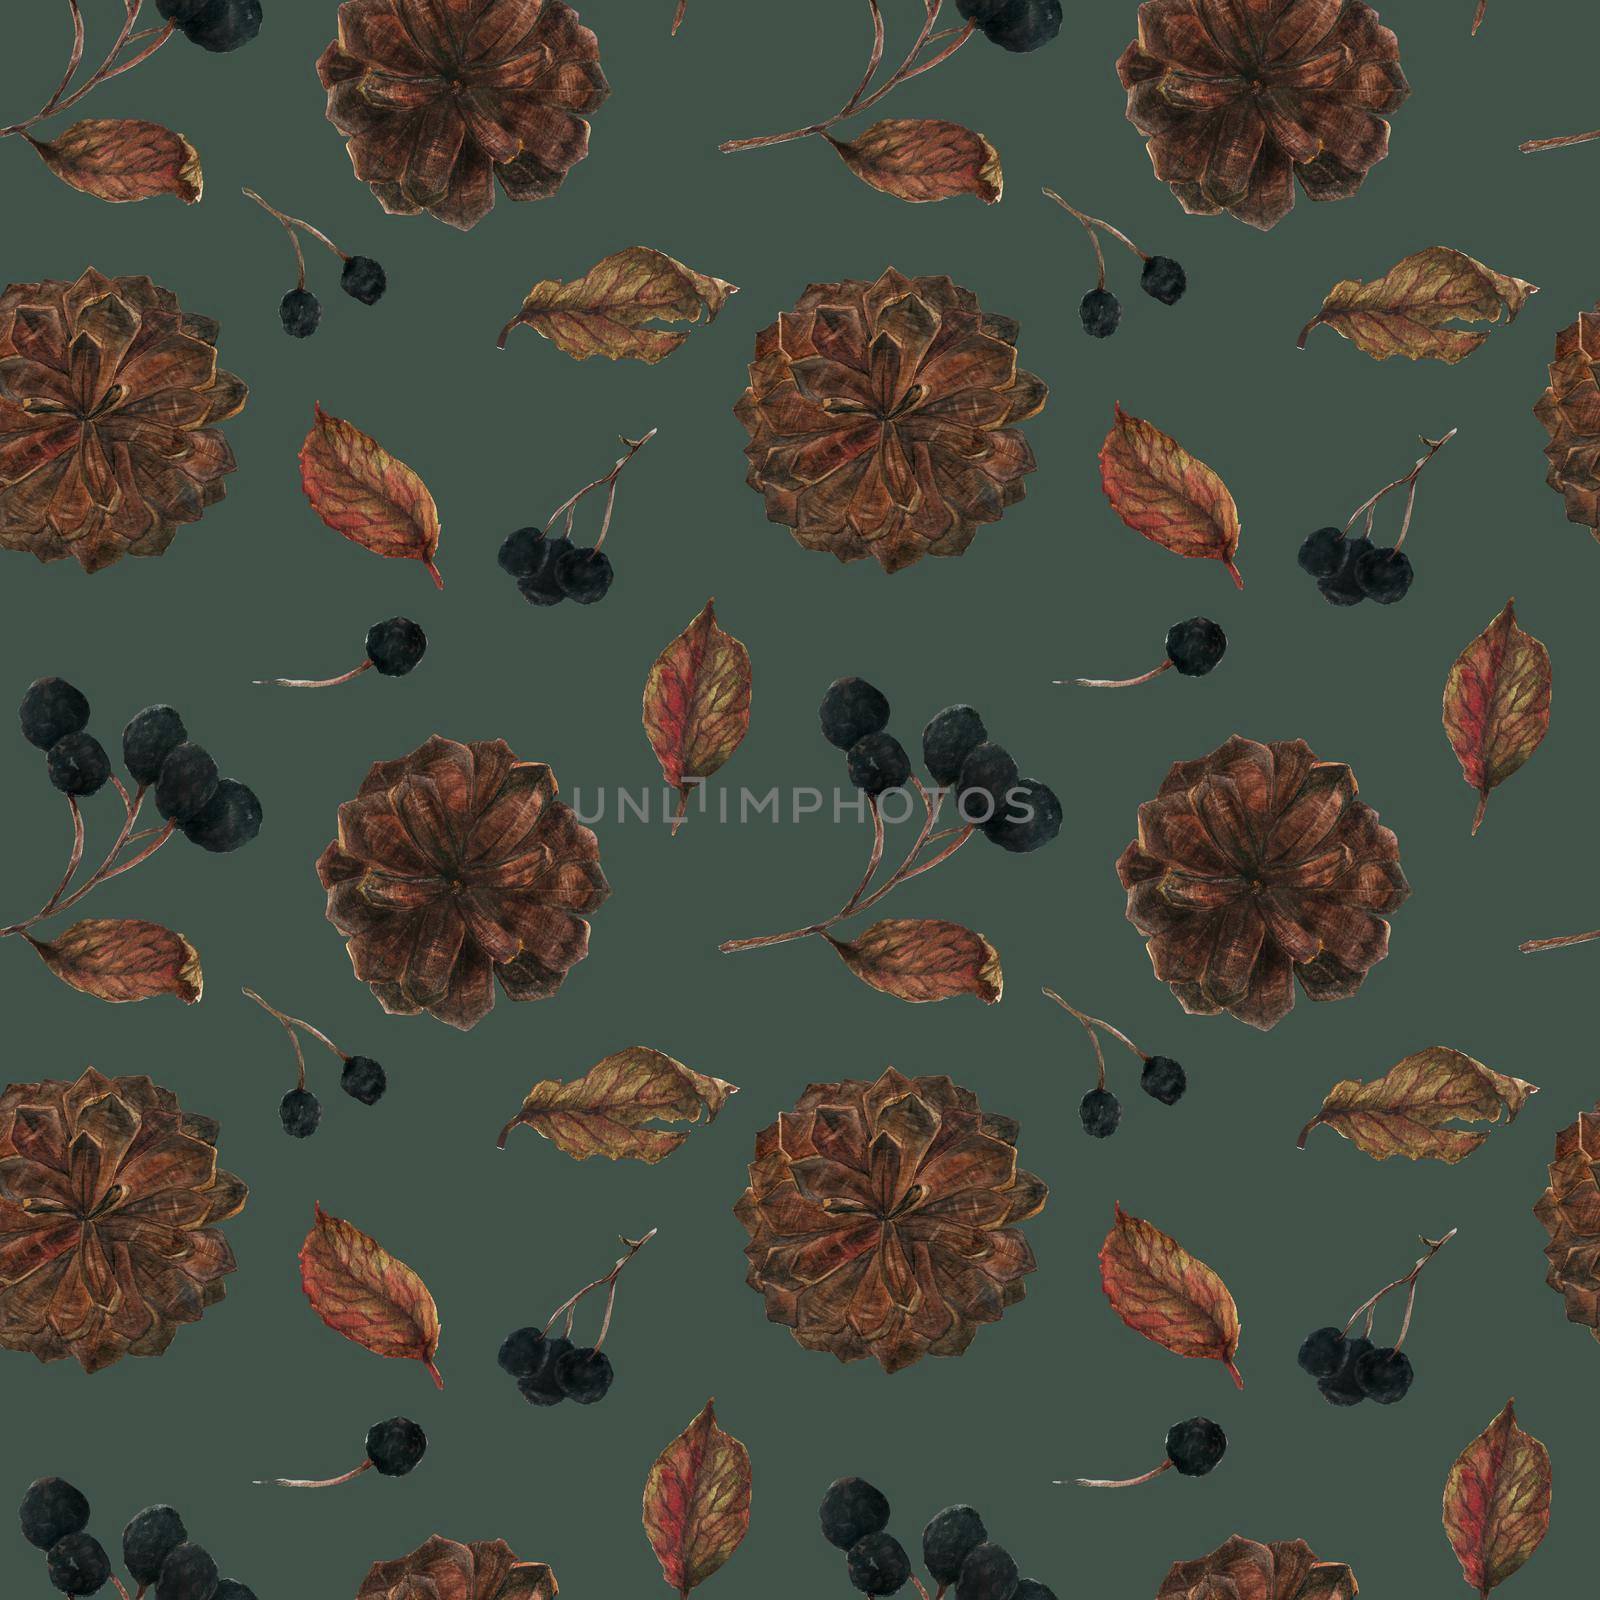 Aronia and Pine Cones for Christmas dark seamless pattern by Xeniasnowstorm